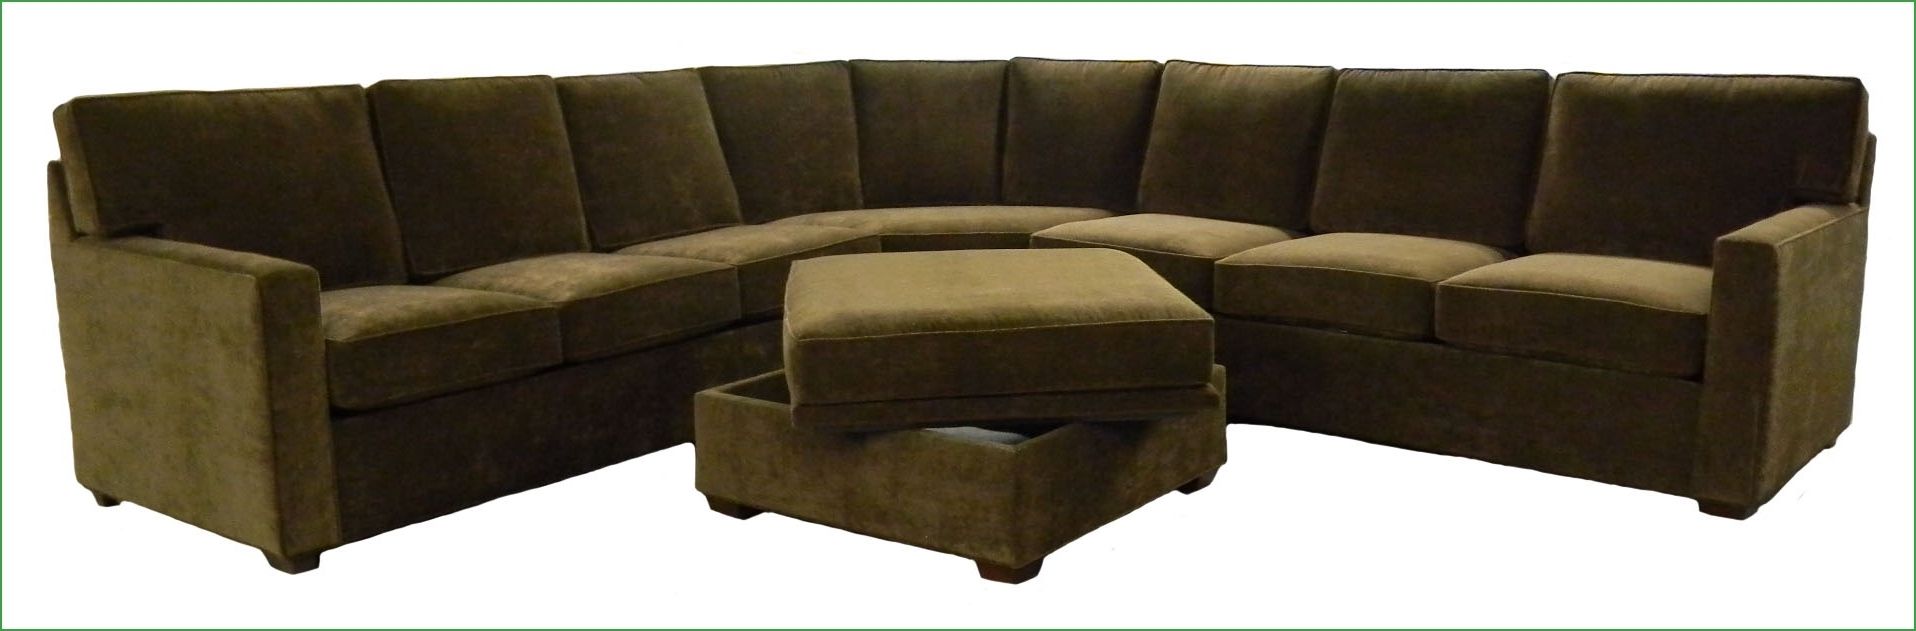 Newest Sofa : Custom Made Sectional Sofas Images Home Design Simple In With Regard To Custom Made Sectional Sofas (View 20 of 20)